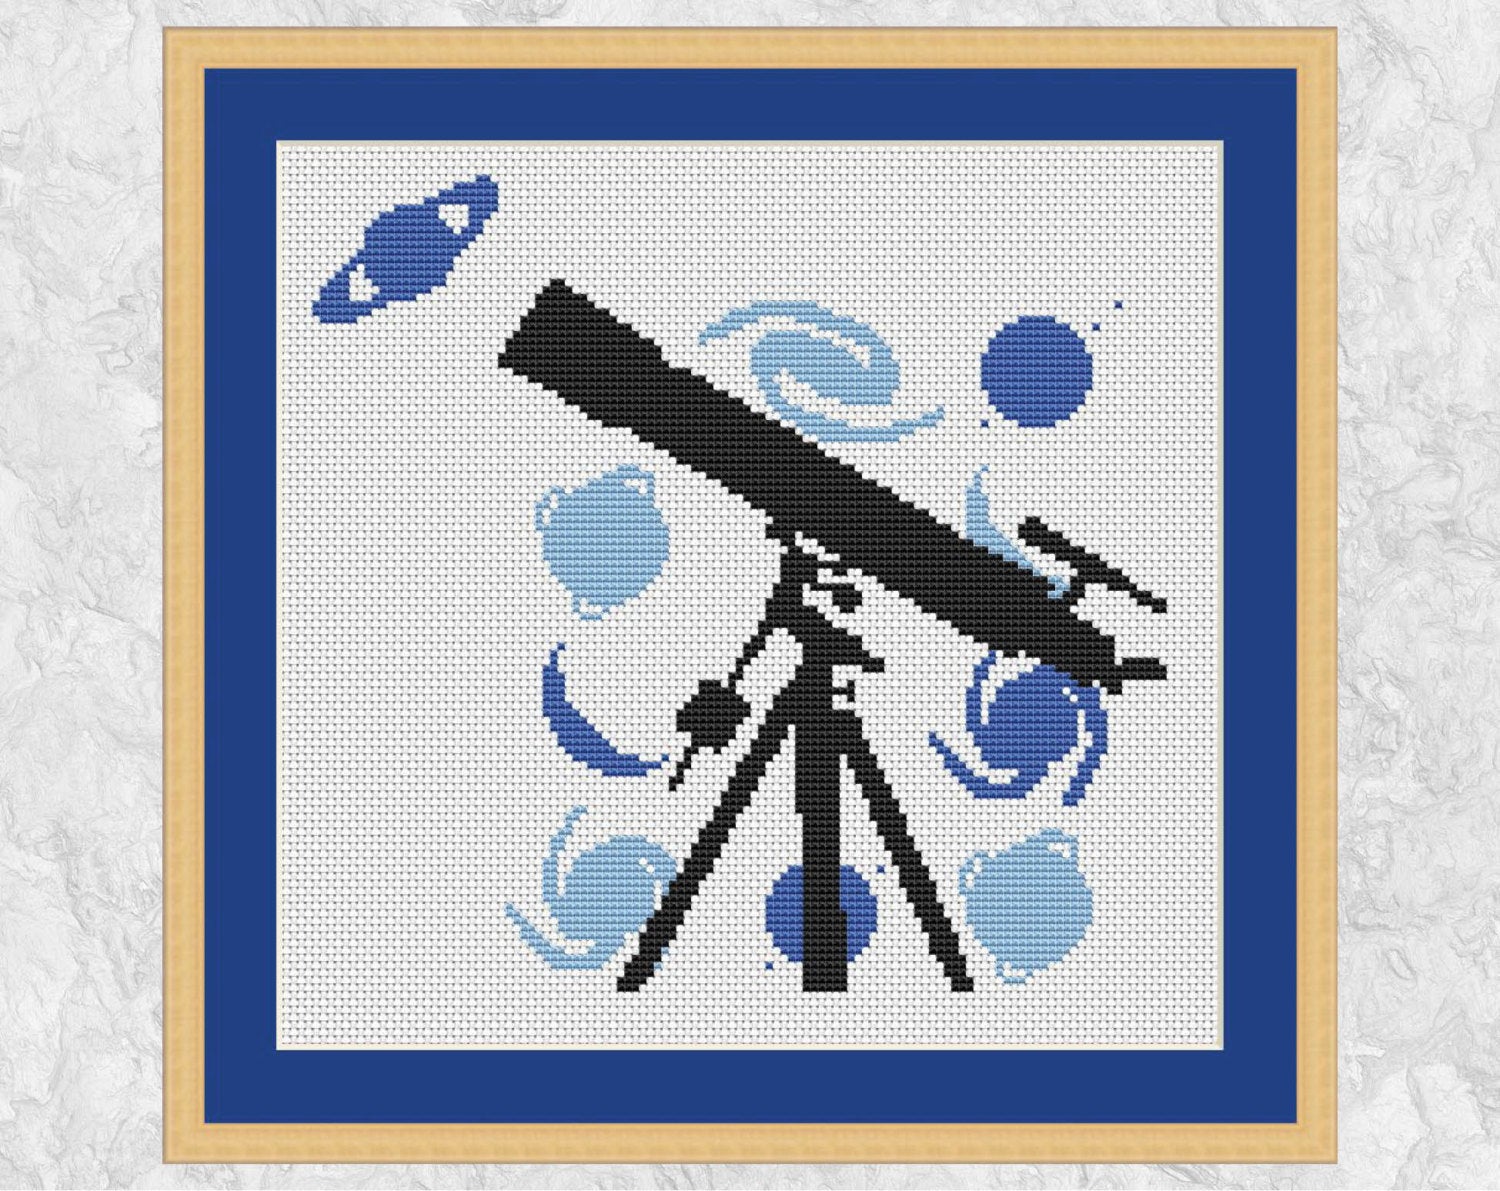 Telescope - Space cross stitch pattern - with frame